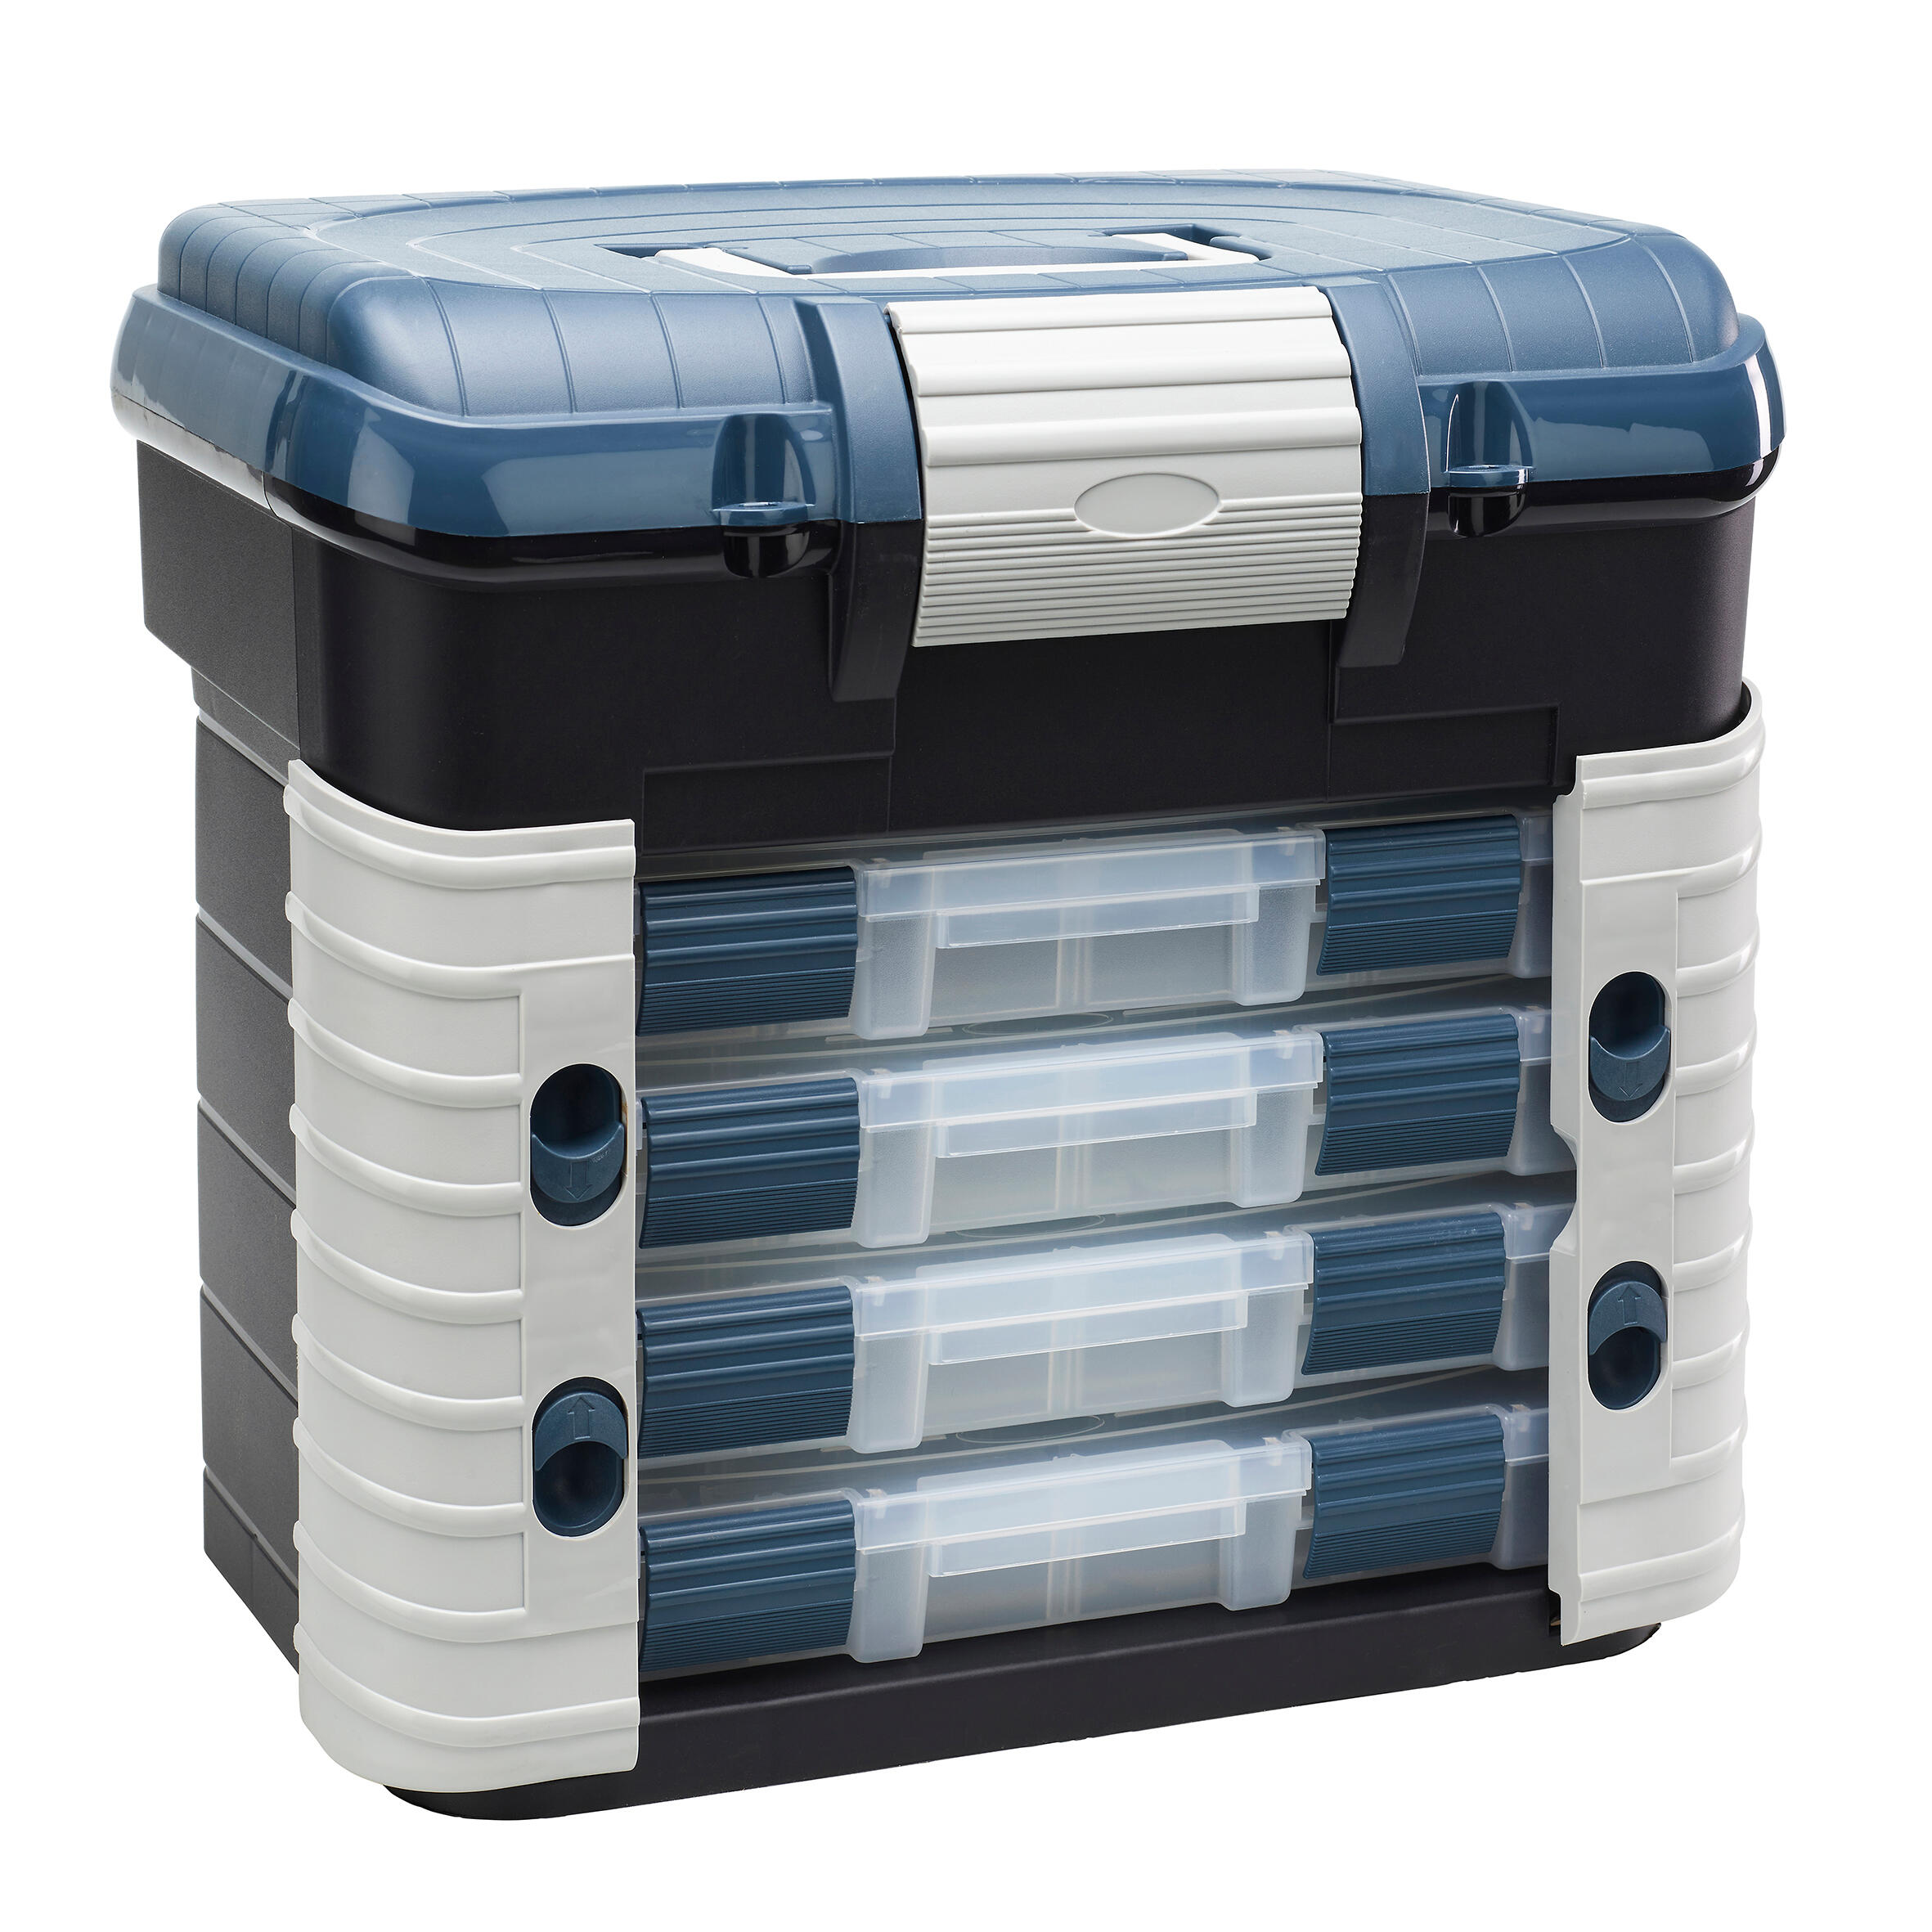 Buy Large Fishing Tackle Box and Chair by Octoplus with 4 drawers